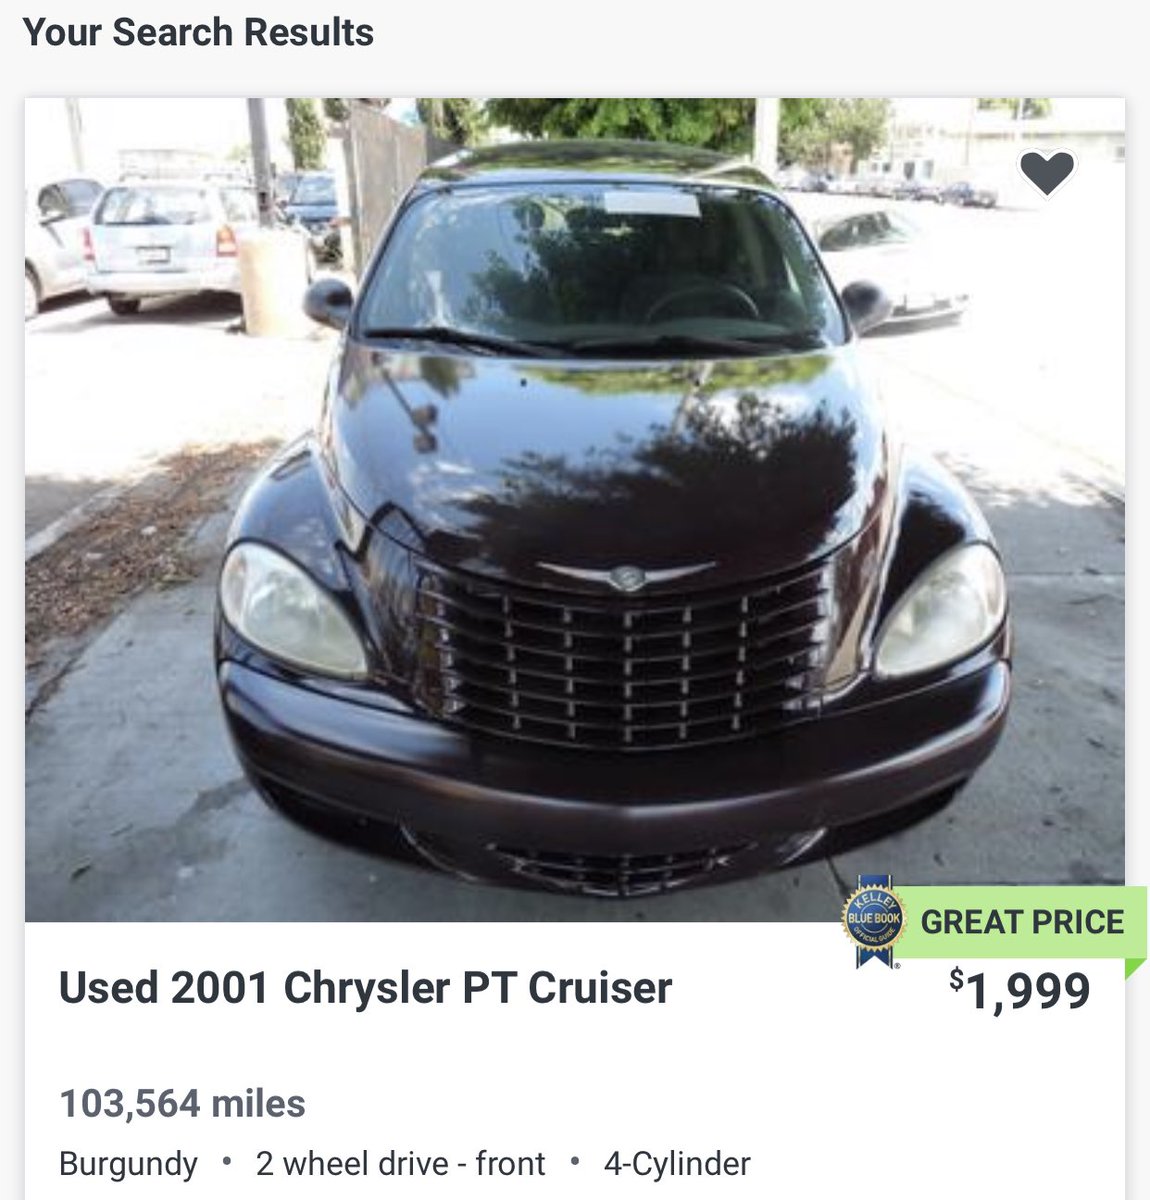 For the amount Trump paid in taxes he could buy 1/3 of this burgundy 2001 PT Cruiser with 100k+ miles on it!!!